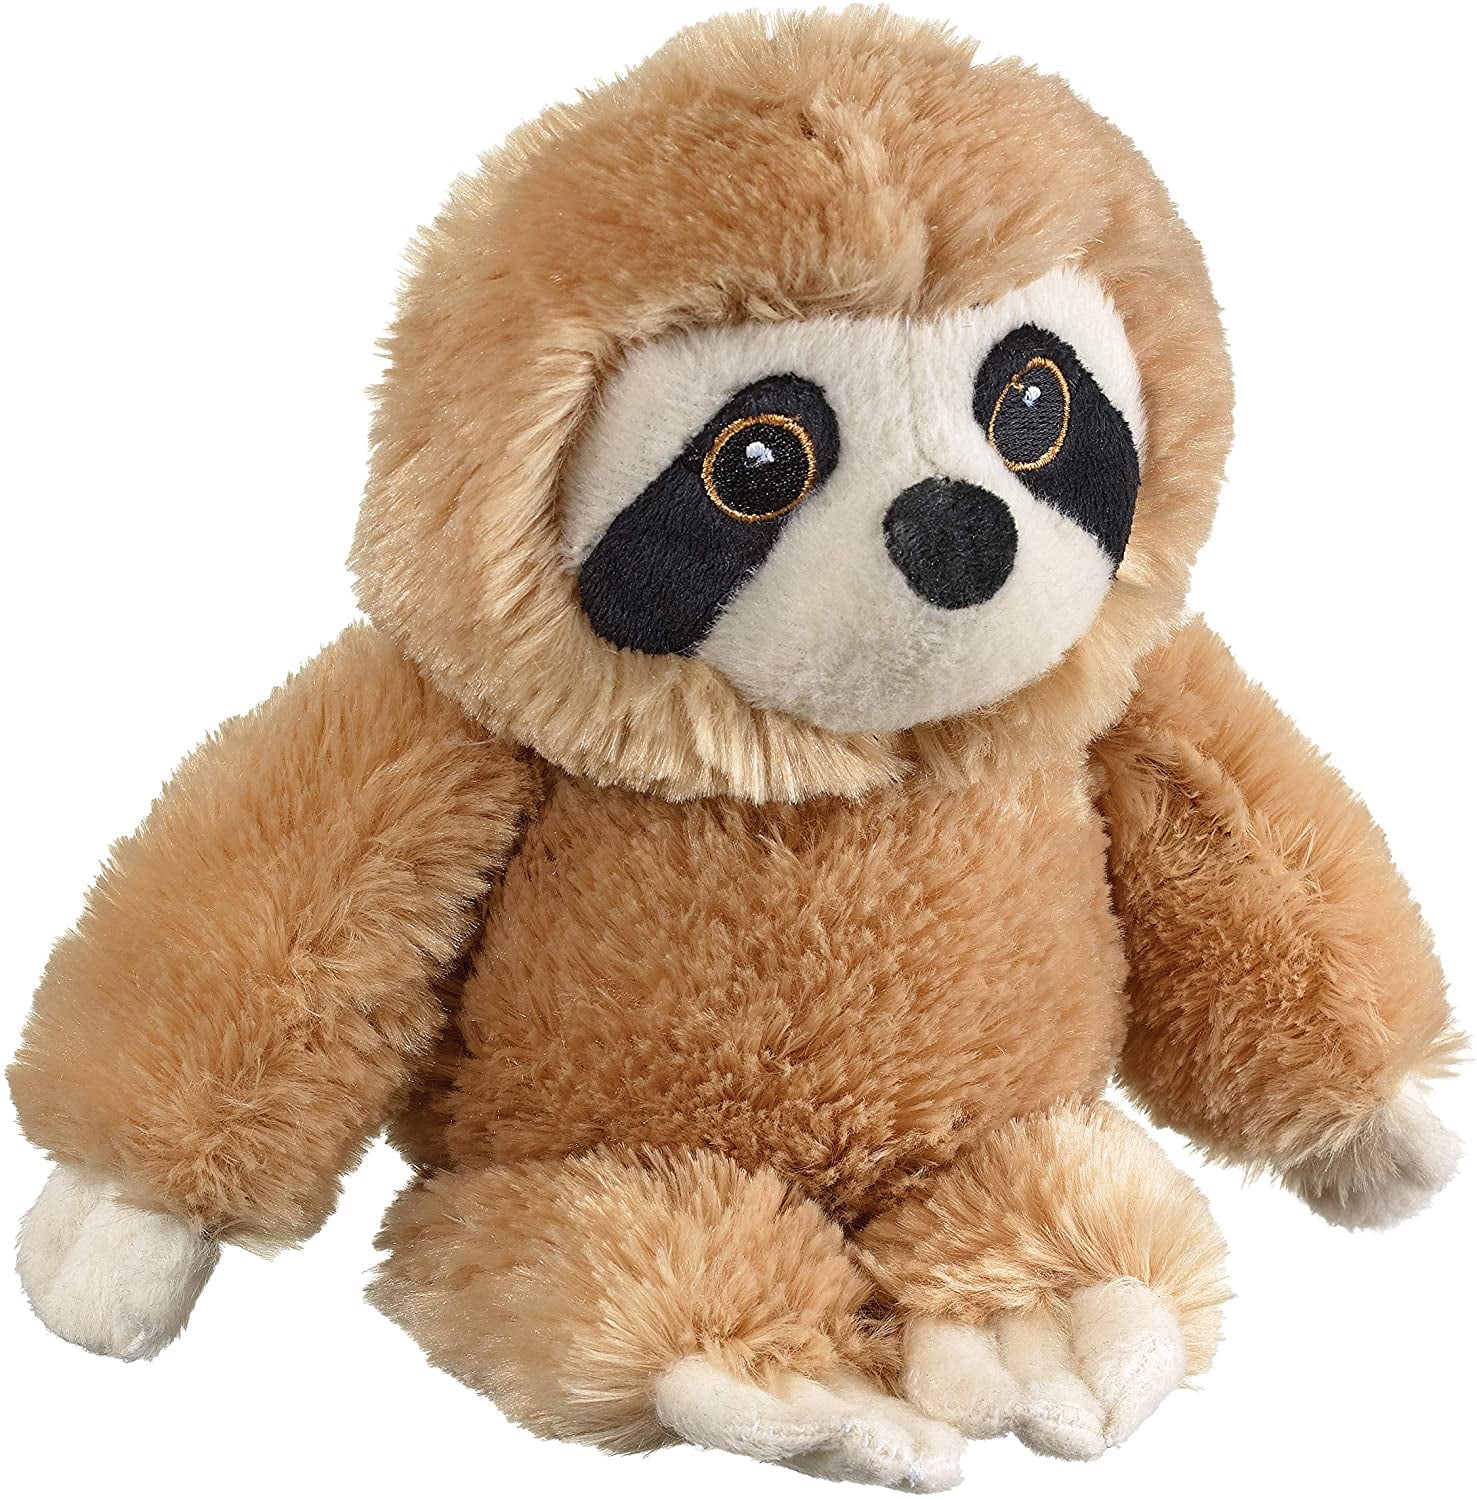 AURORA HANG & SWING  SLOTH 13" PLUSH BRAND NEW WITH TAGS SOFT TOY 